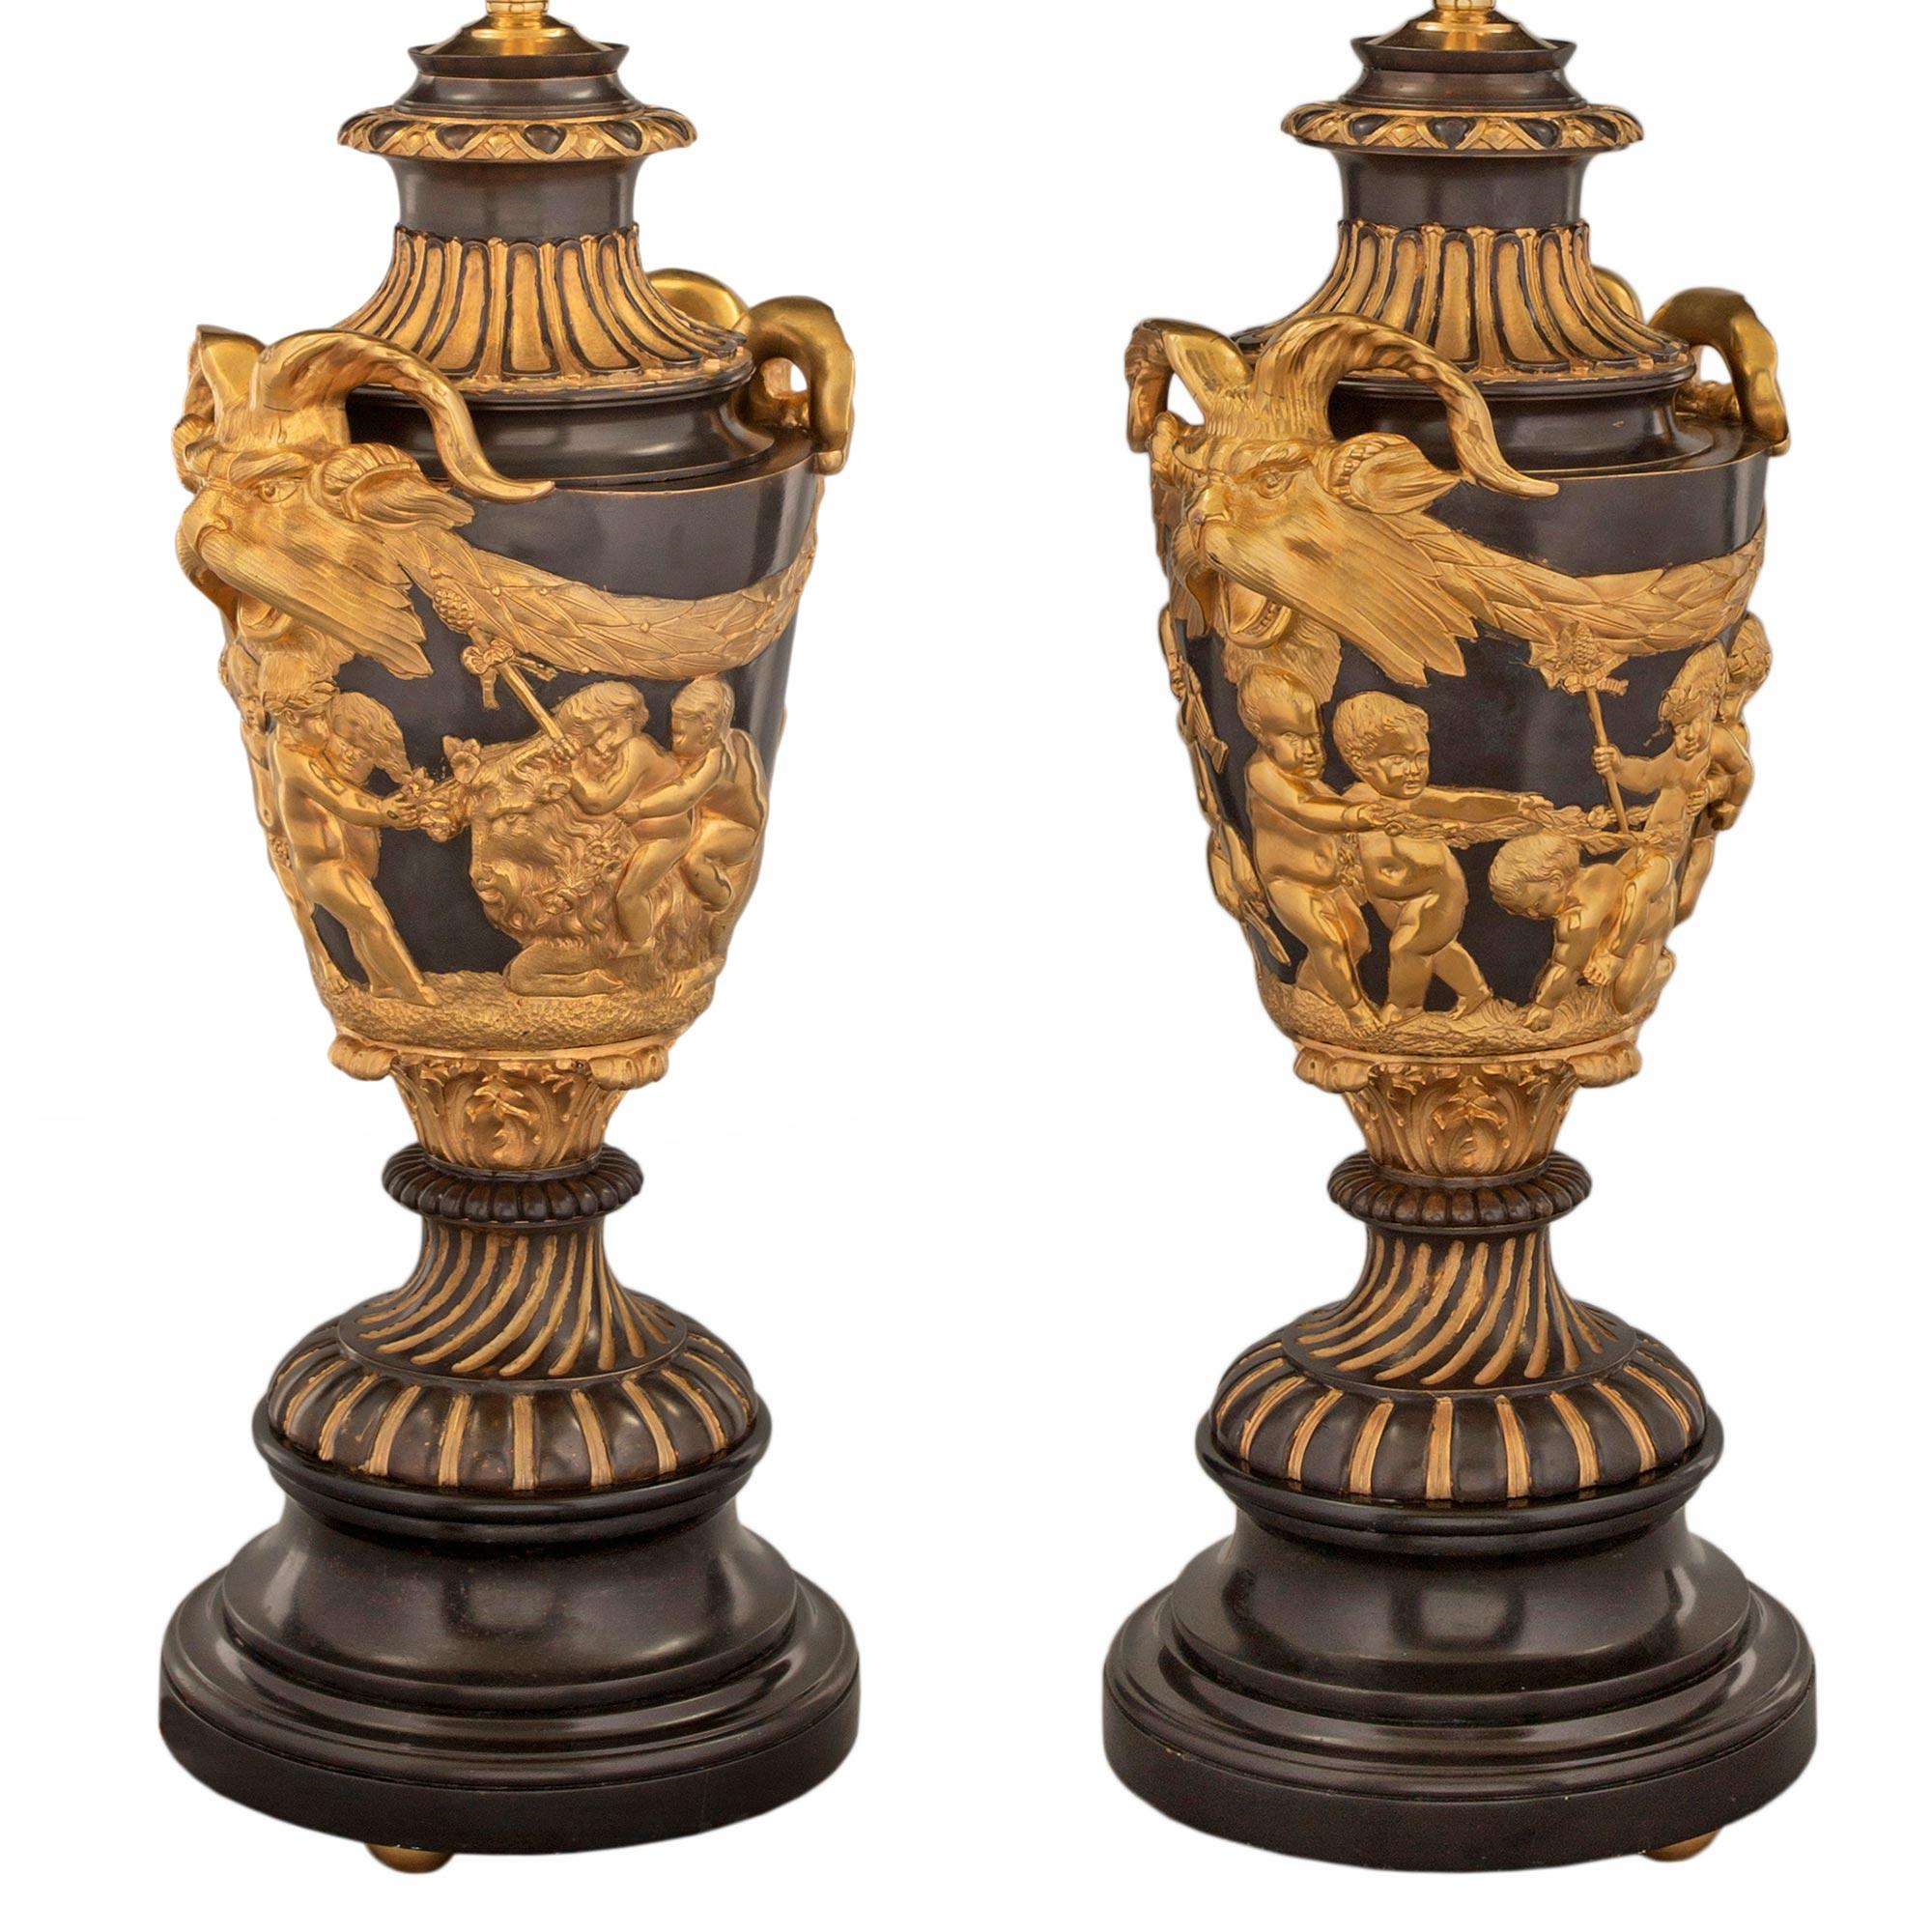 A handsome pair of French 19th century Neo-Classical st. Black Belgian marble, ormolu and patinated bronze lamps in the manner of Clodion after a model by John Flaxman. Each lamp is raised by a beautiful circular mottled black Belgian marble base